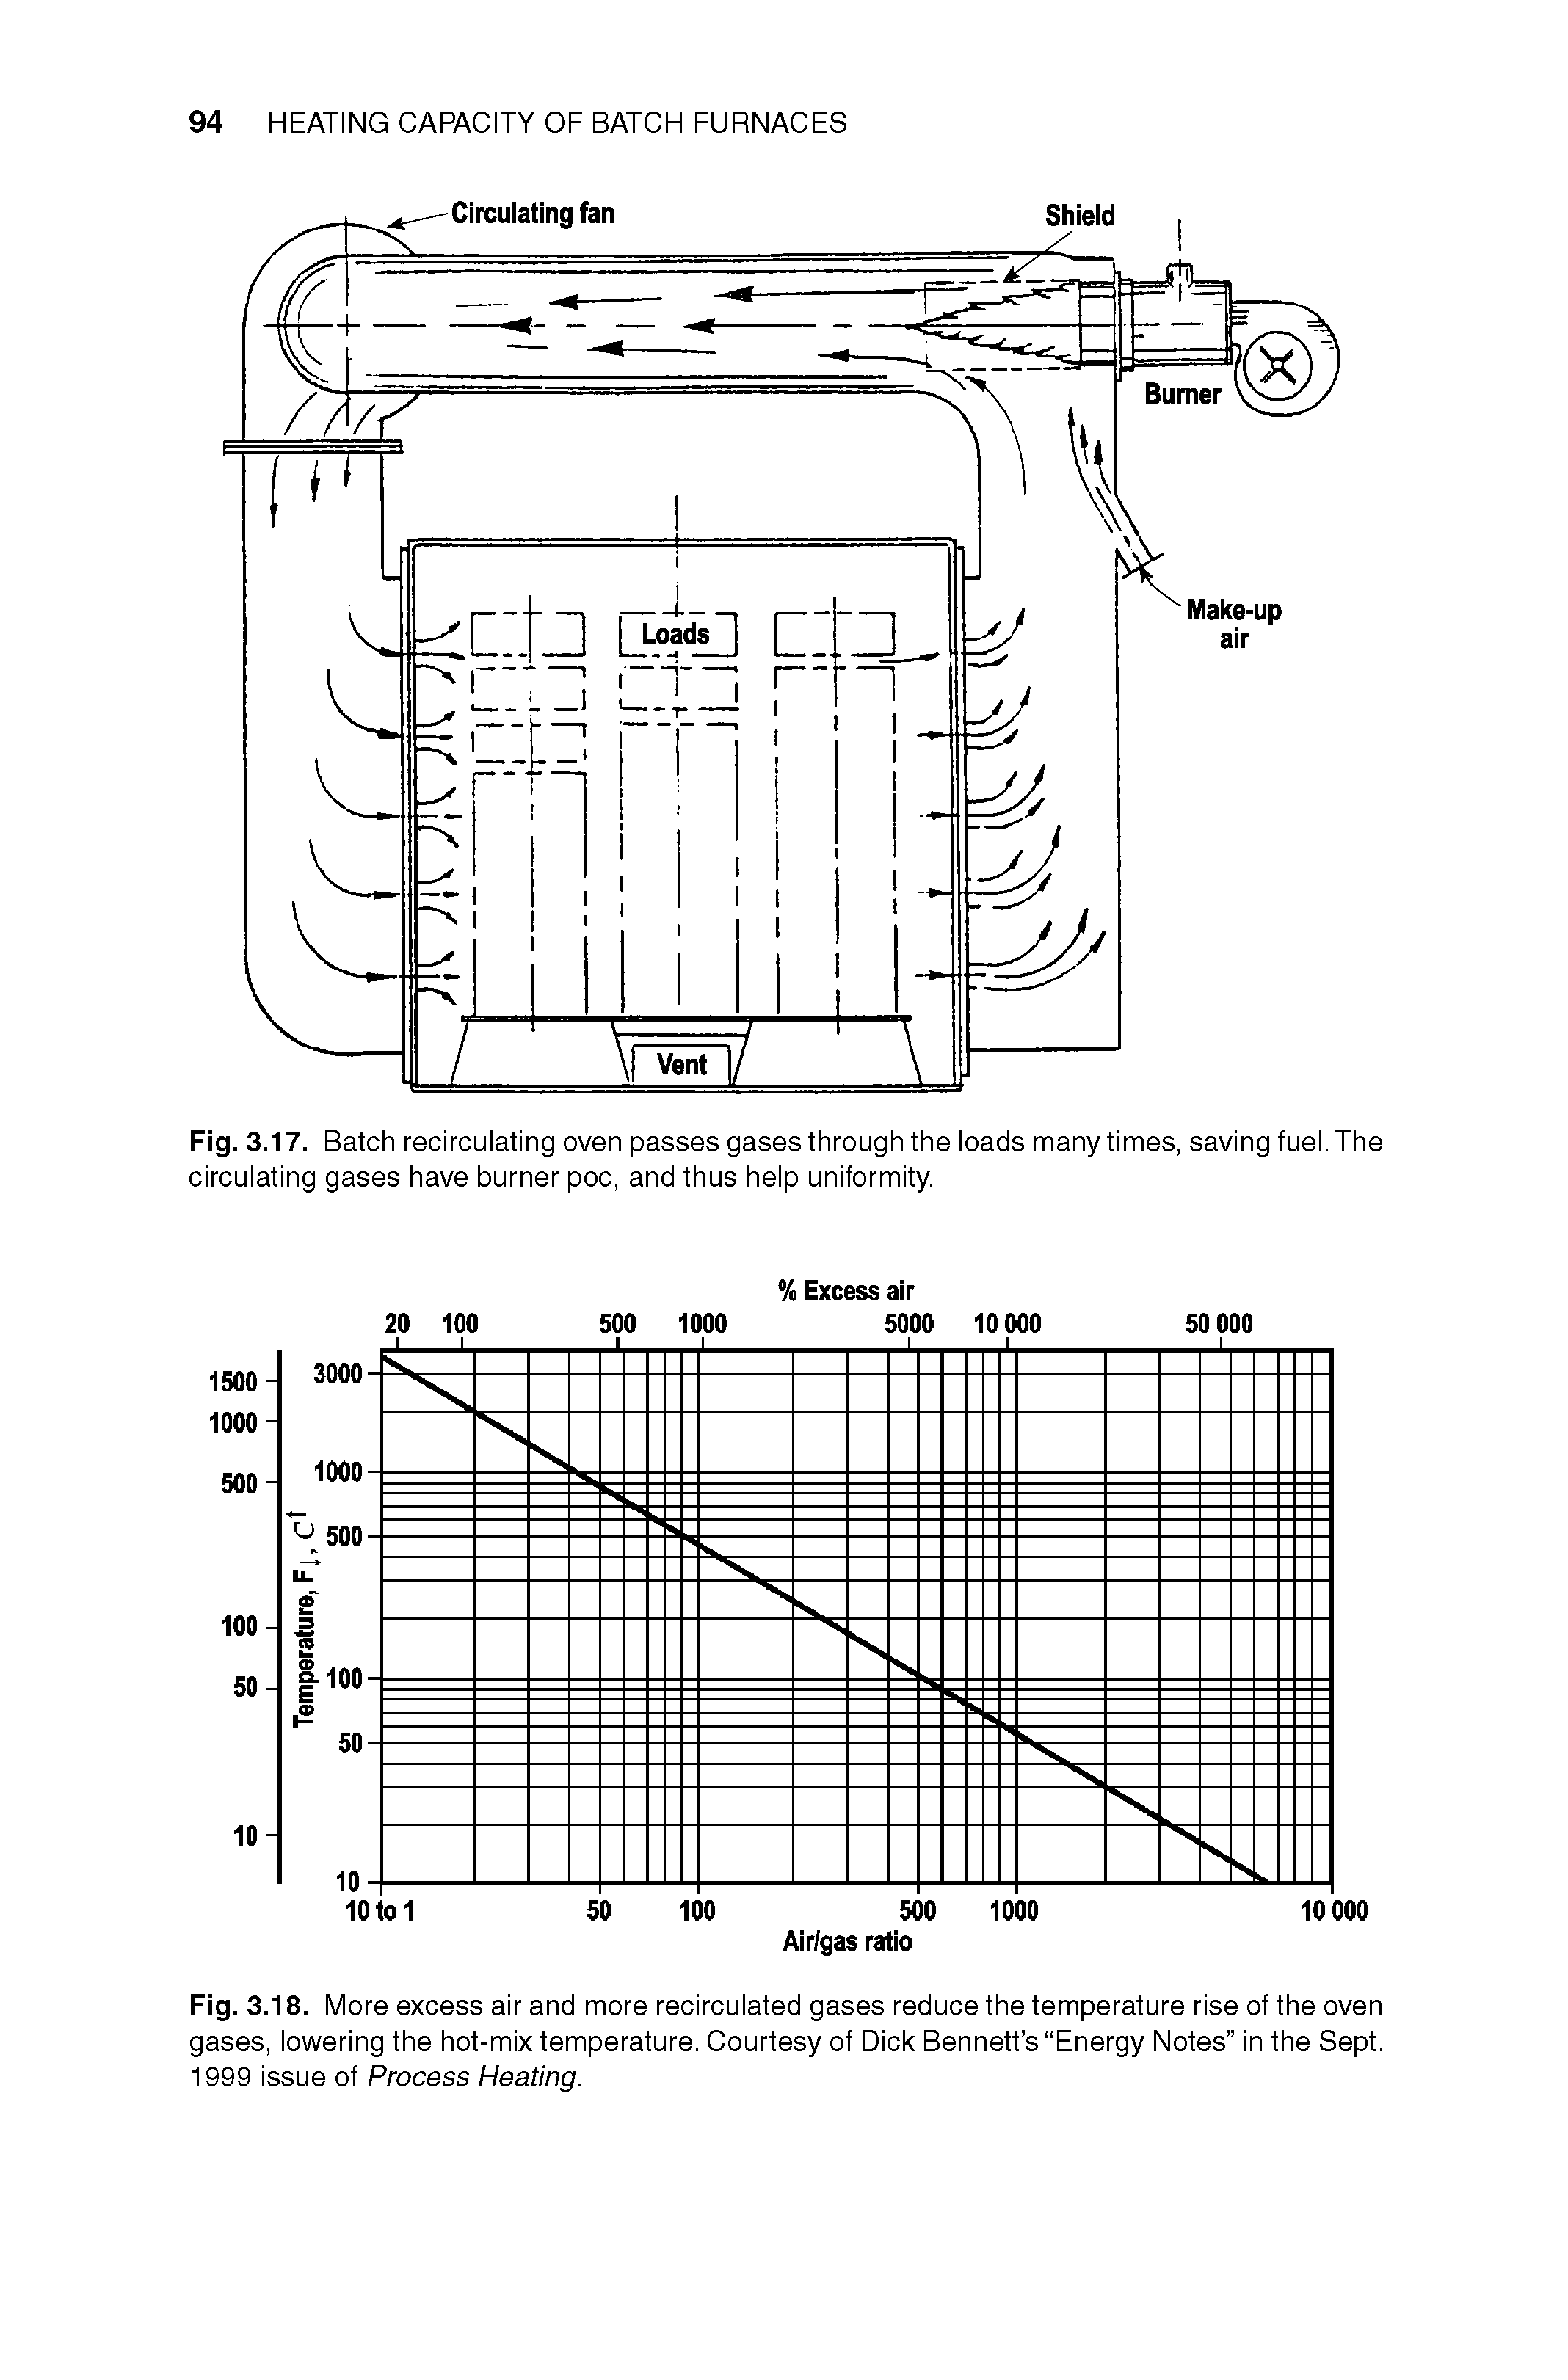 Fig. 3.17. Batch recirculating oven passes gases through the loads many times, saving fuel. The circulating gases have burner poc, and thus help uniformity.